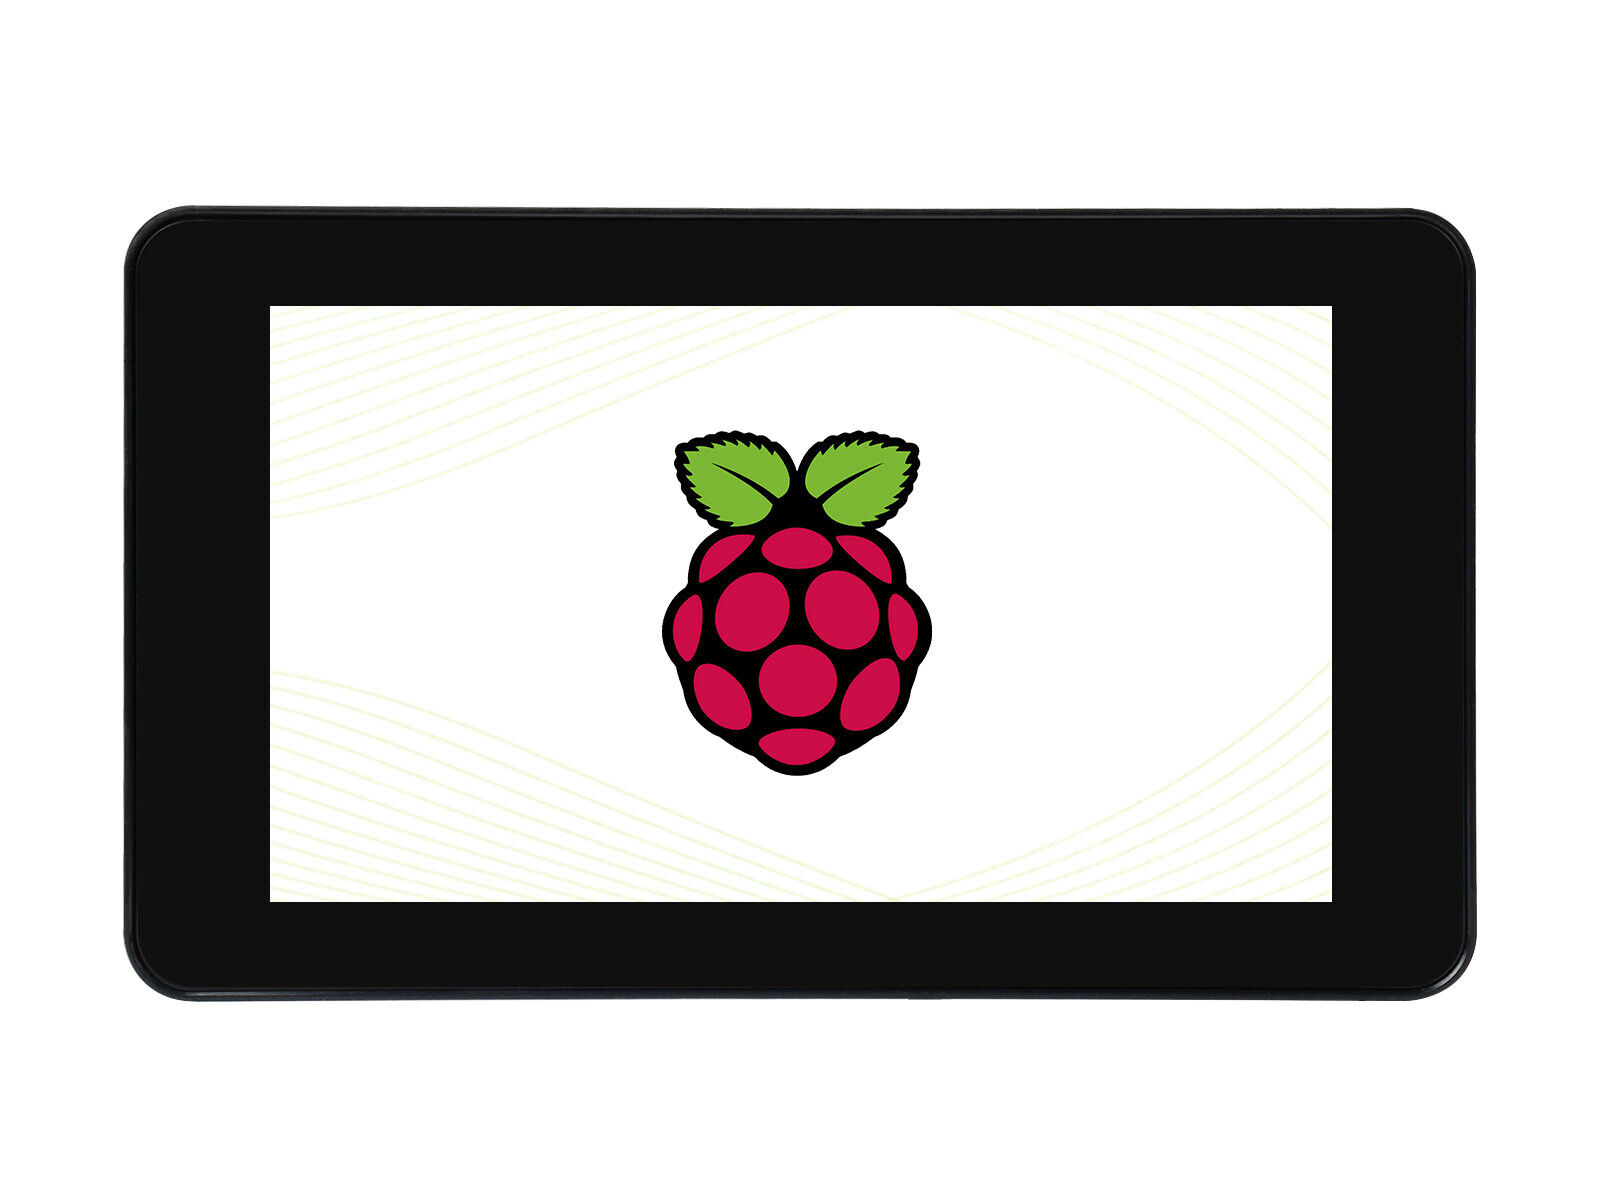 Waveshare 7inch Capacitive Touch IPS Display for Raspberry Pi 1024×600 DSI